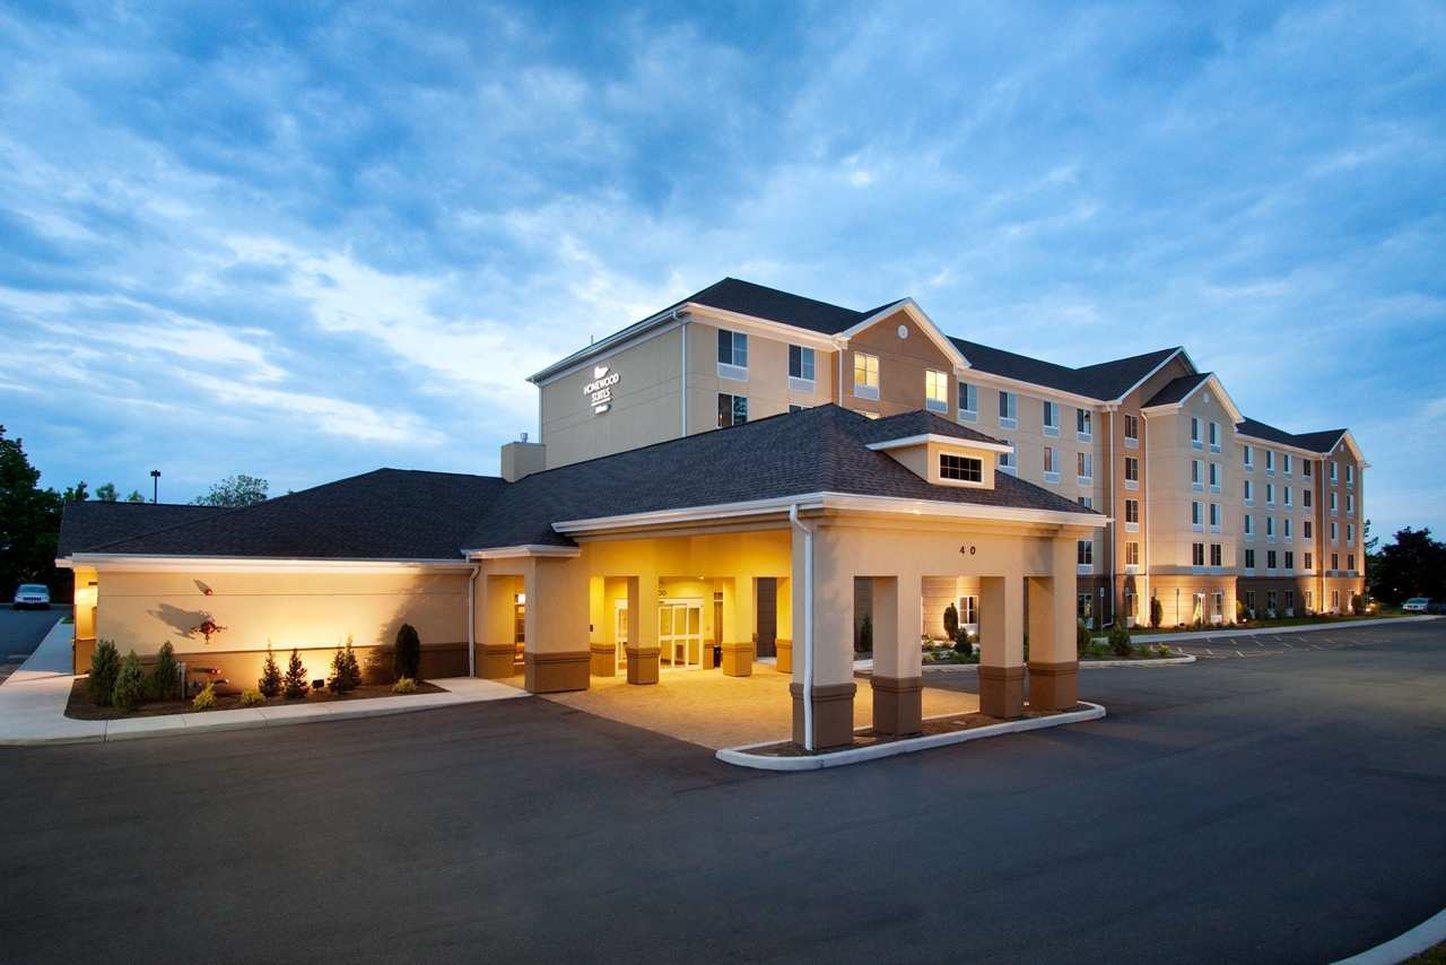 Photo of Homewood Suites by Hilton Rochester/Greece, NY, Rochester, NY